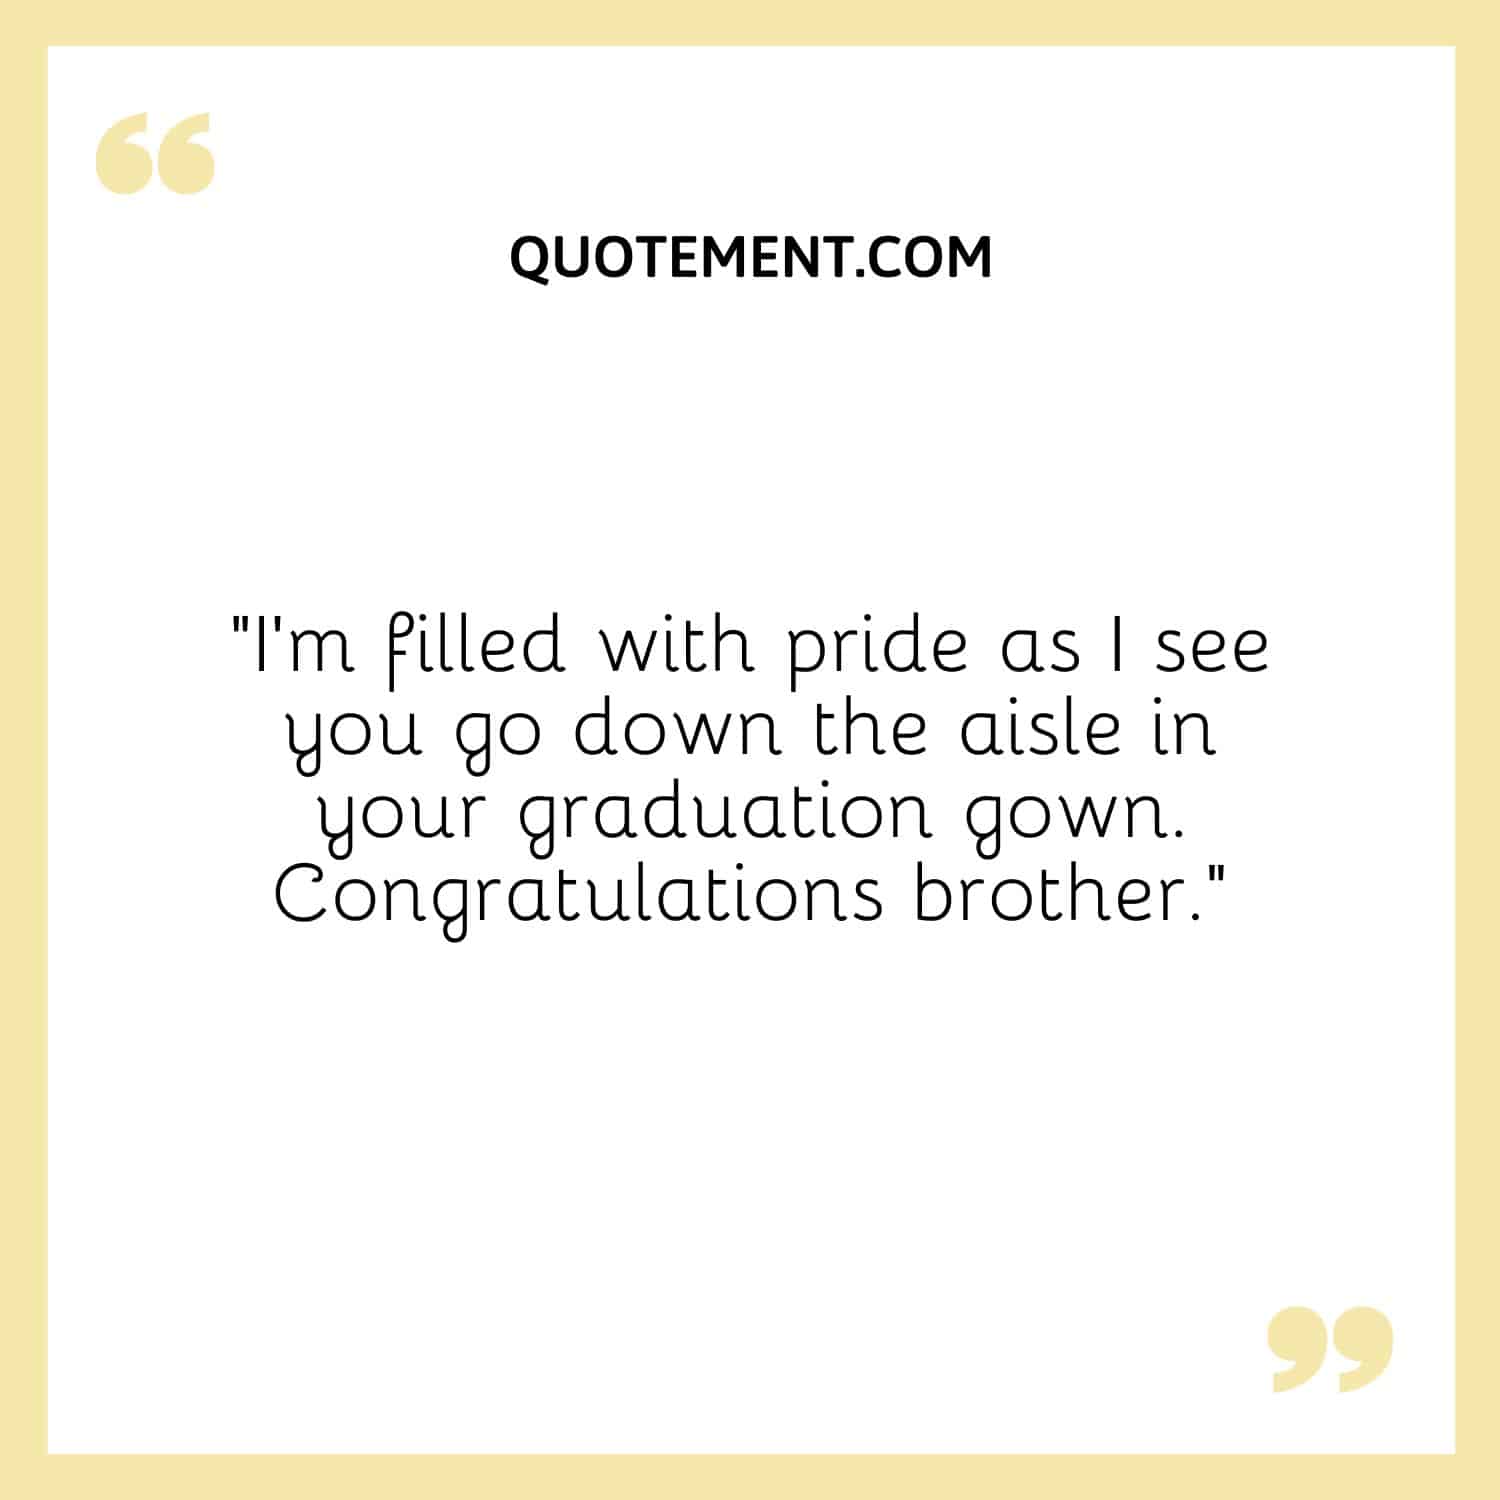 “I’m filled with pride as I see you go down the aisle in your graduation gown. Congratulations brother.”